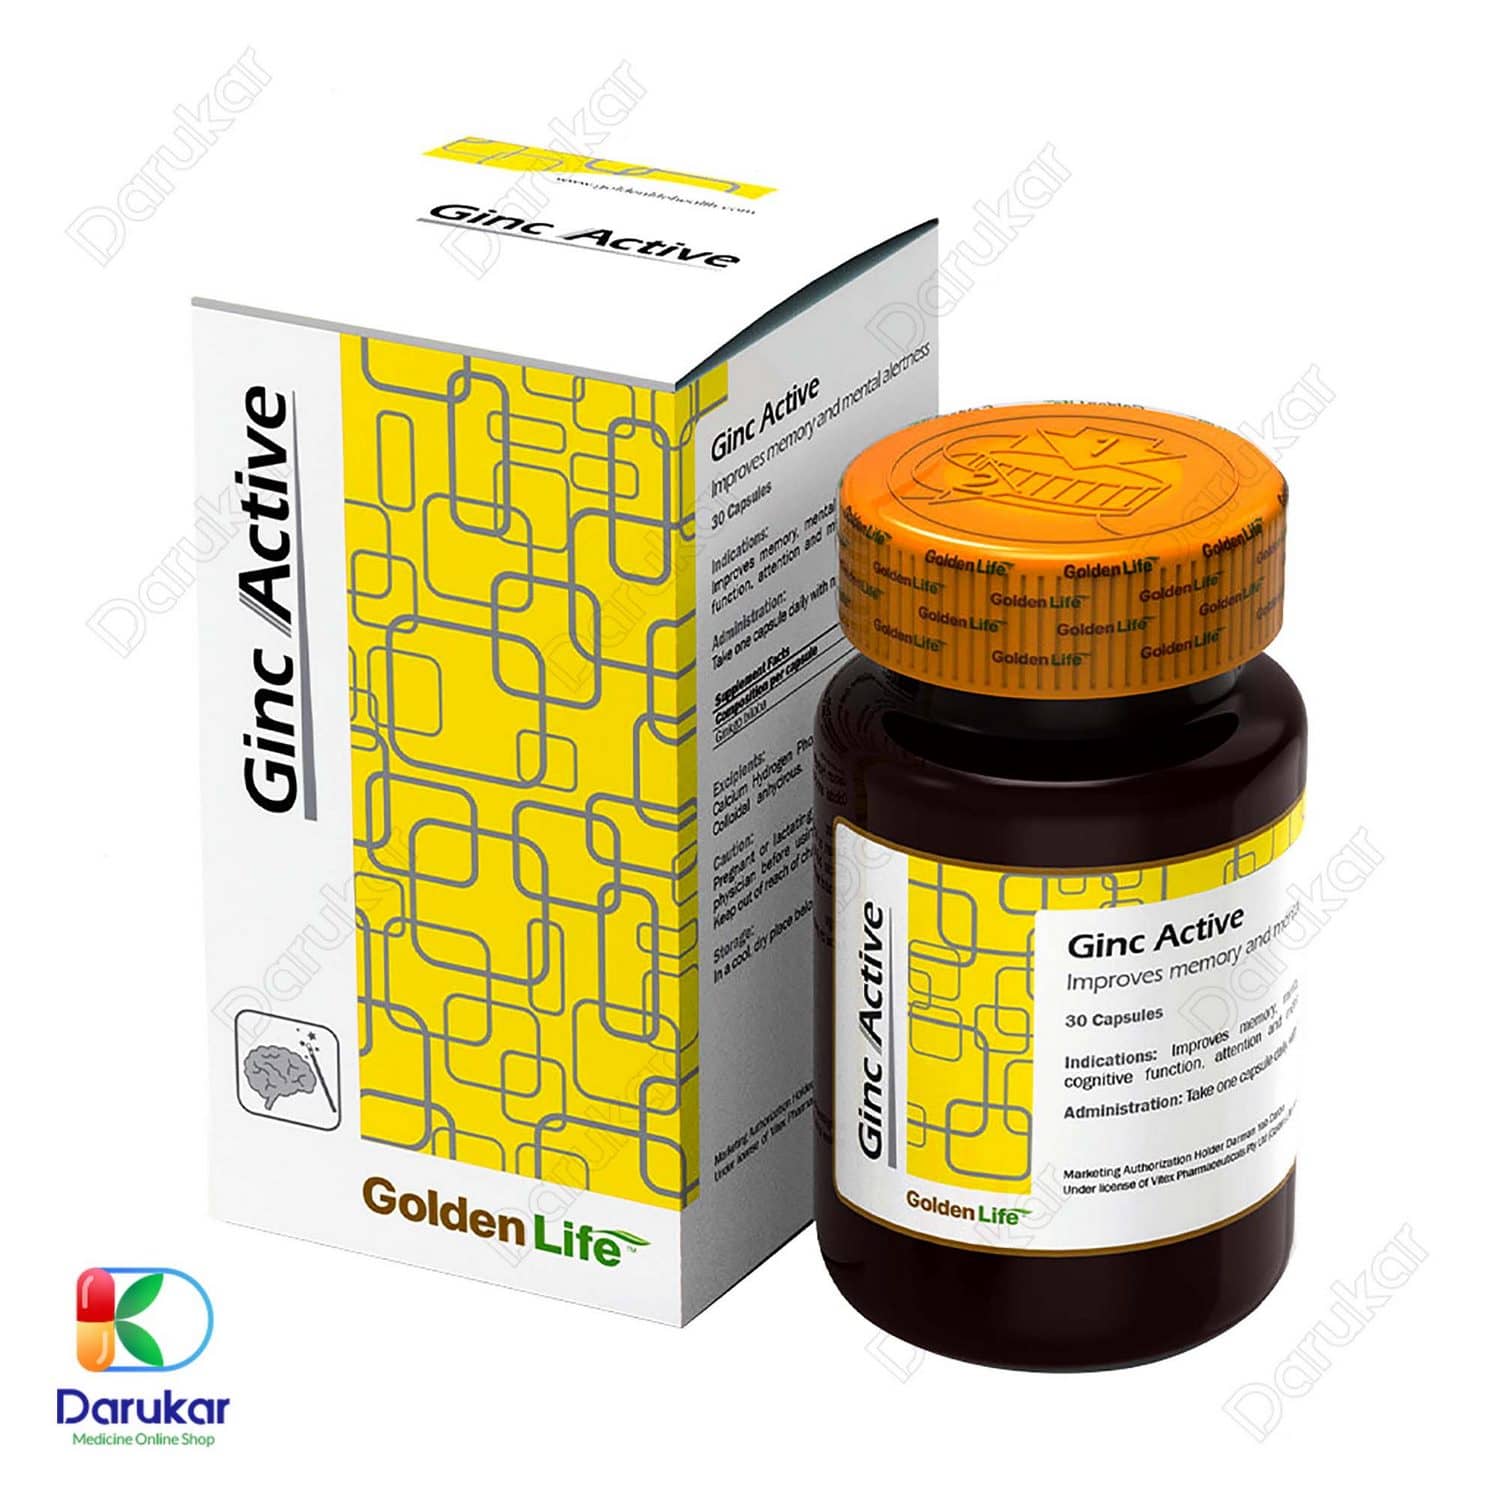 Golden Life Ginc Active 30 Capsules Image Gallery